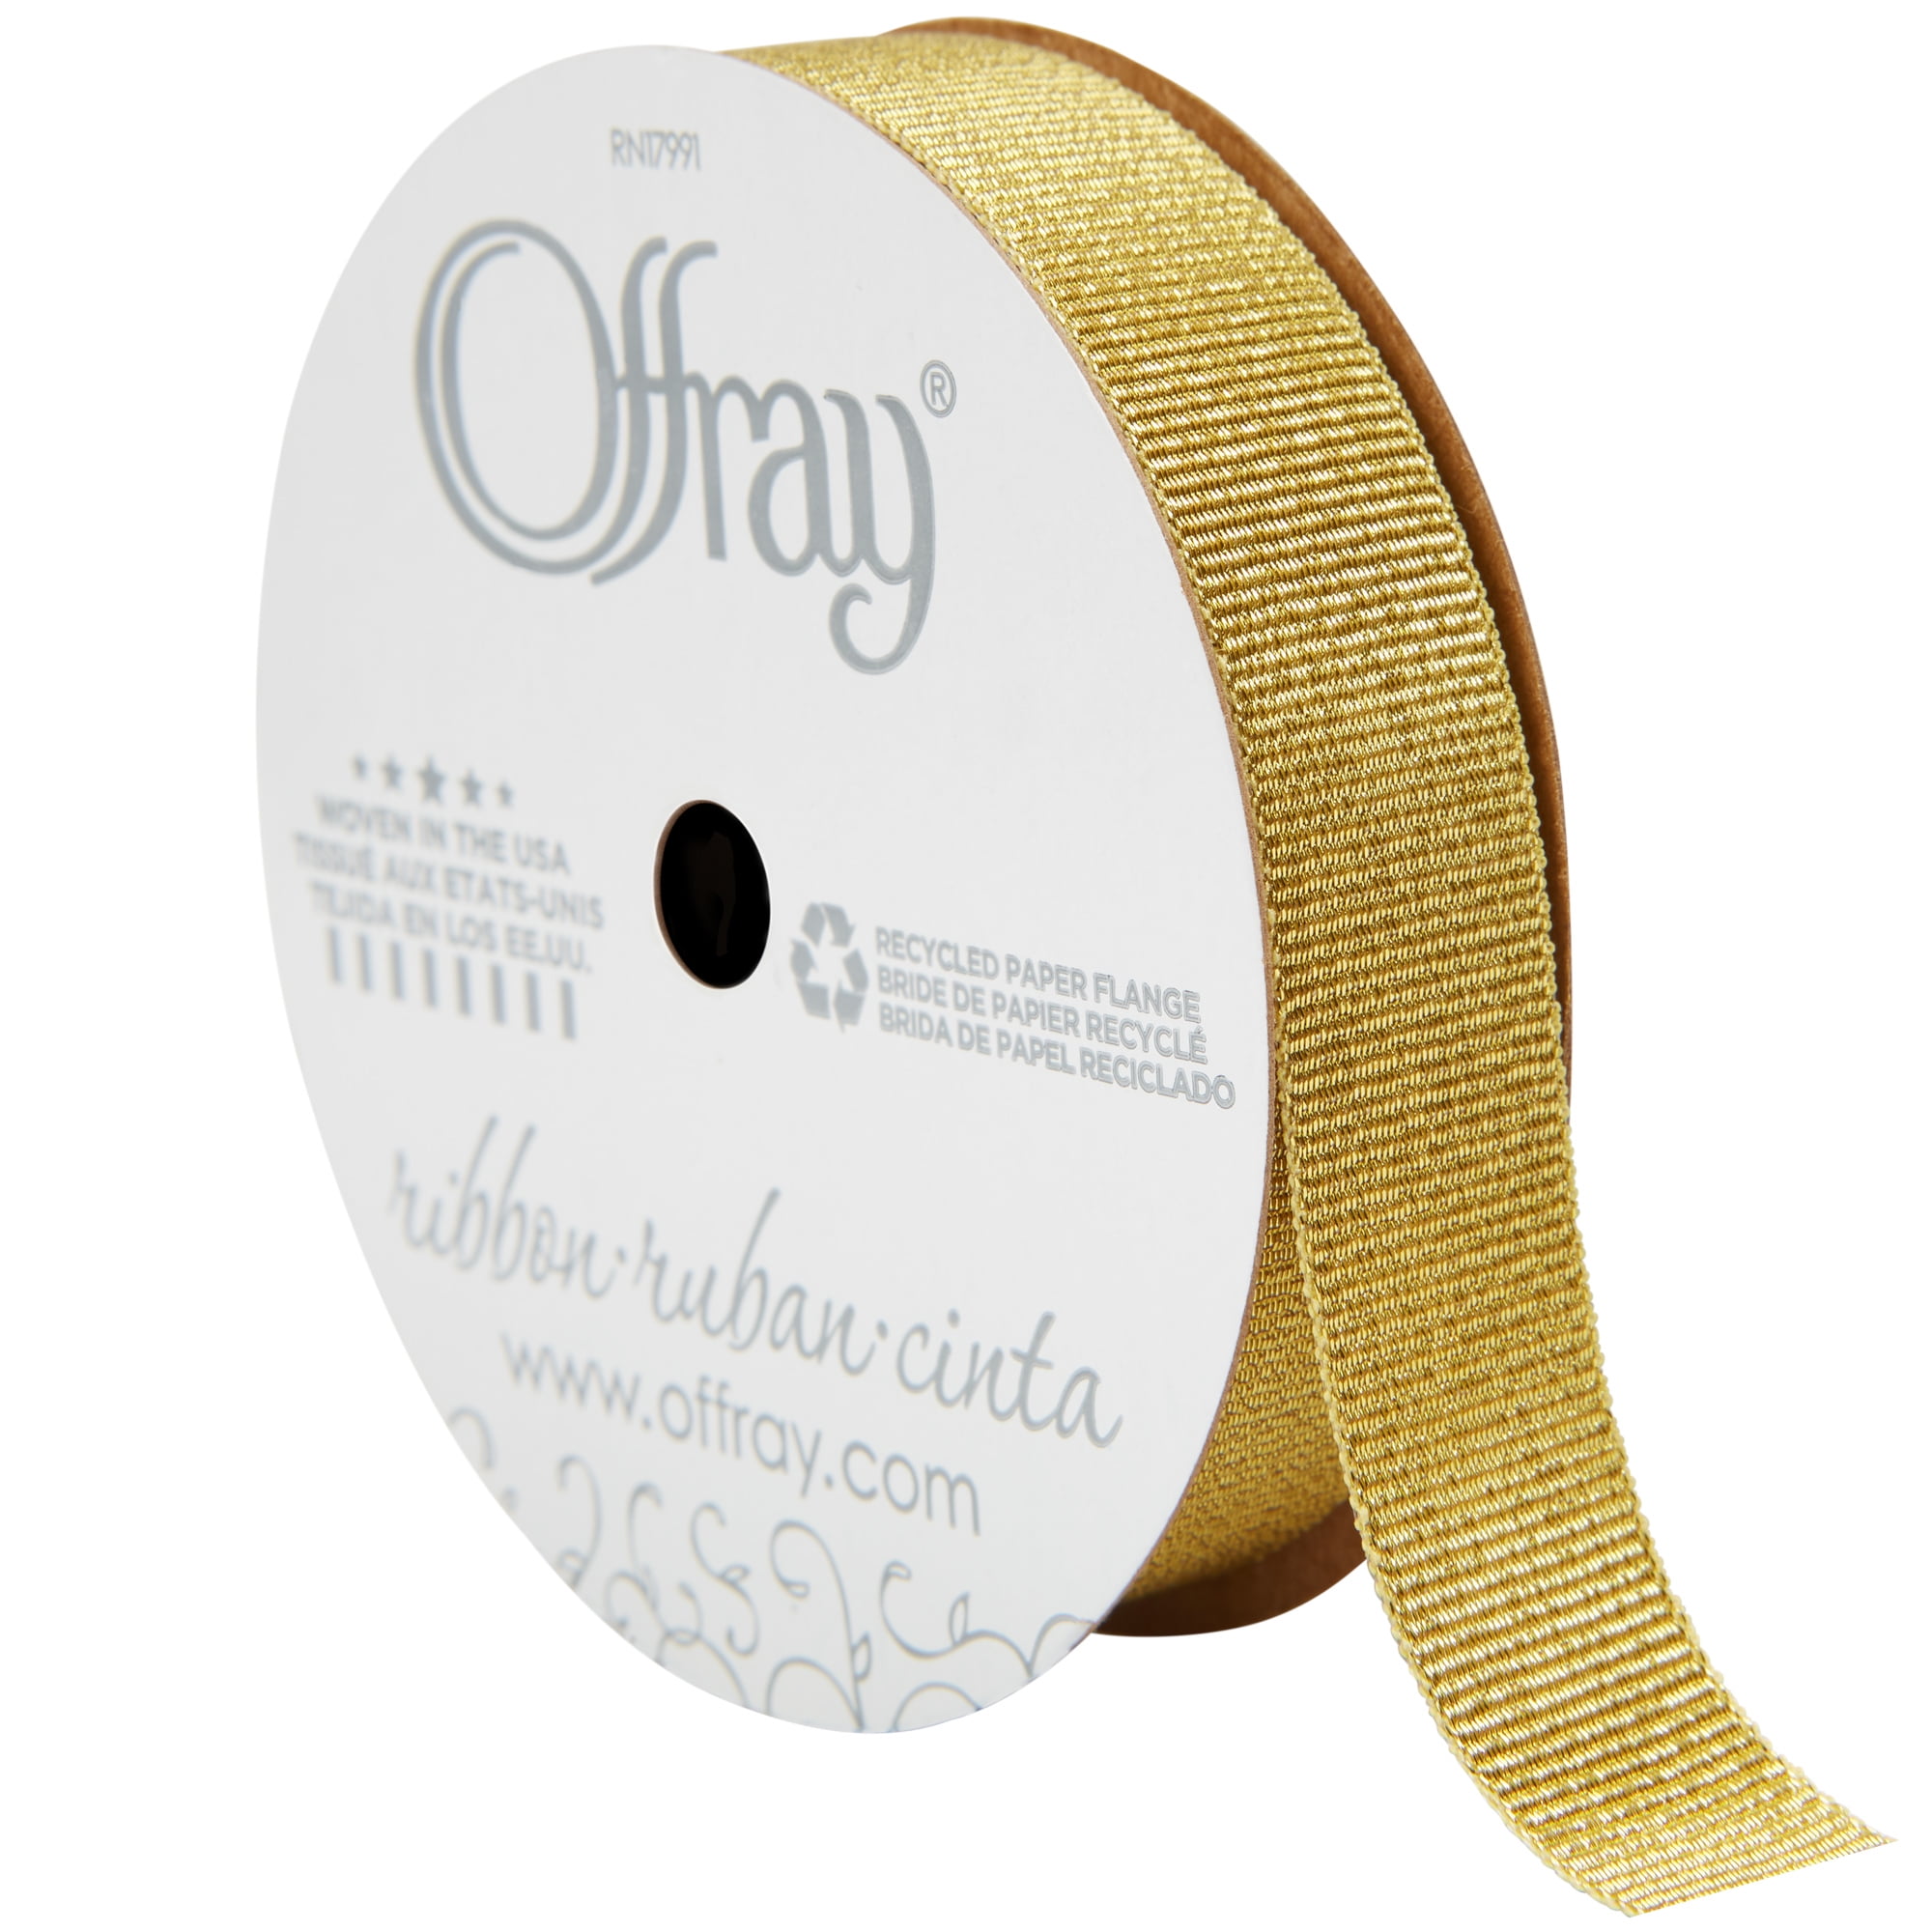 CRAFT FREE POSTAGE CHRISTMAS 5 YARDS OF GOLD RIBBON 4 mm WIDE FOR CARD MAKING 